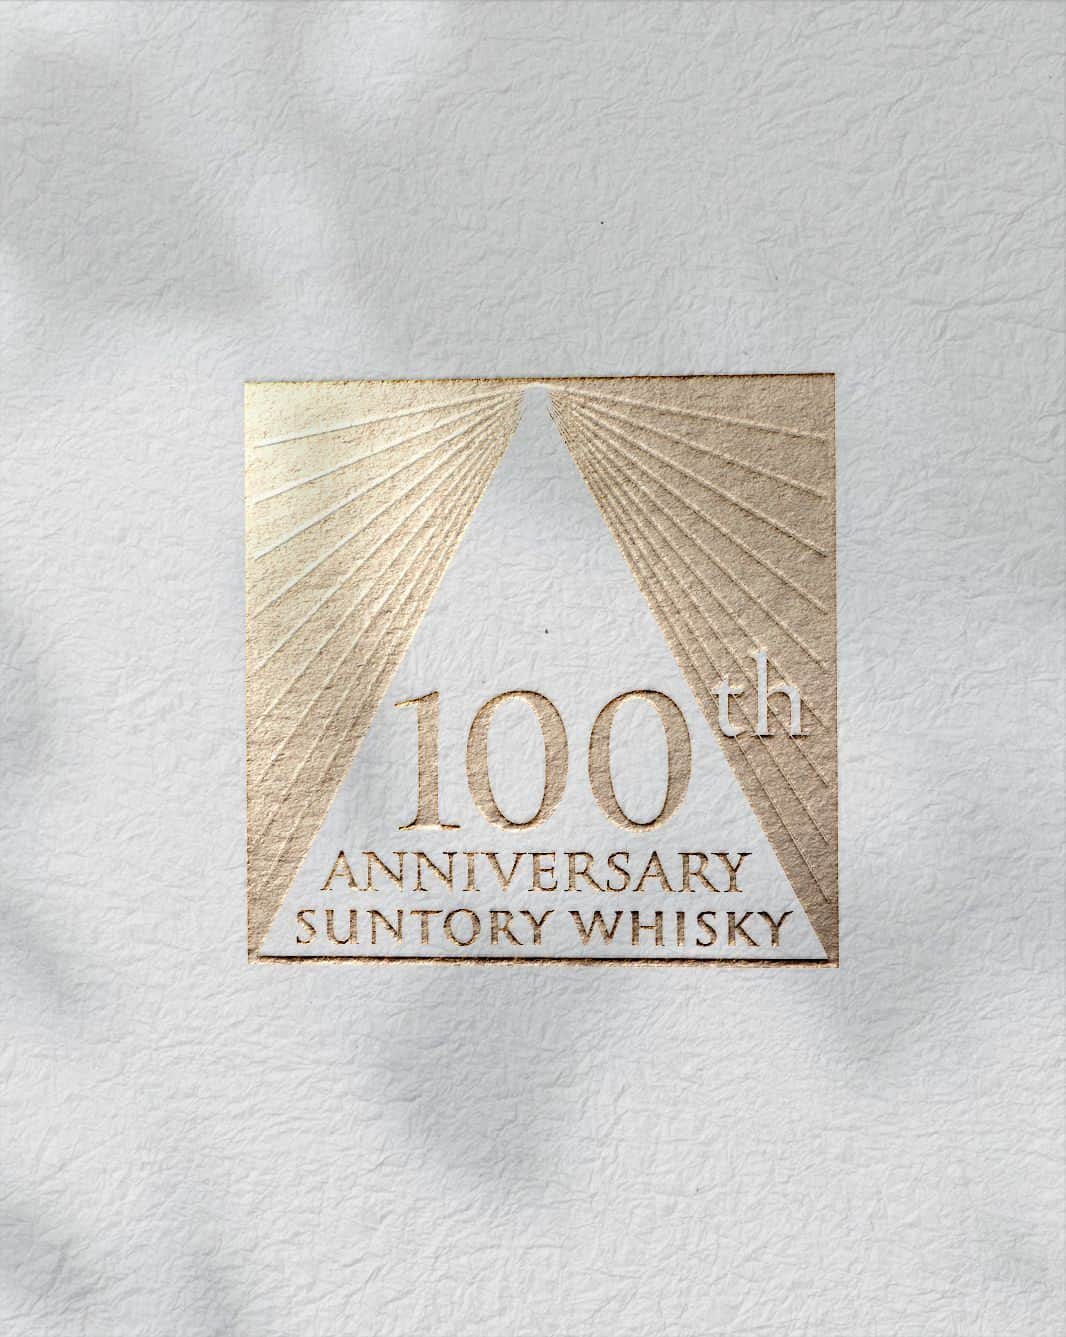 Suntory Whiskyのインスタグラム：「In 2023, the House of Suntory celebrates 100 years of pioneering Japanese whisky. This is a unique opportunity to thank each and everyone of you for your support over the years. We are thrilled to open a new chapter, and while we proudly look back at our rich history and achievements, our eyes remain focused on the next 100 years, committed to keep offering you whiskies and experiences of the highest quality. Stay tuned for some great surprises throughout the year and please join us in this celebration along the way!⁣ ⁣ #Suntory100 #SuntoryWhisky #SuntoryTime」